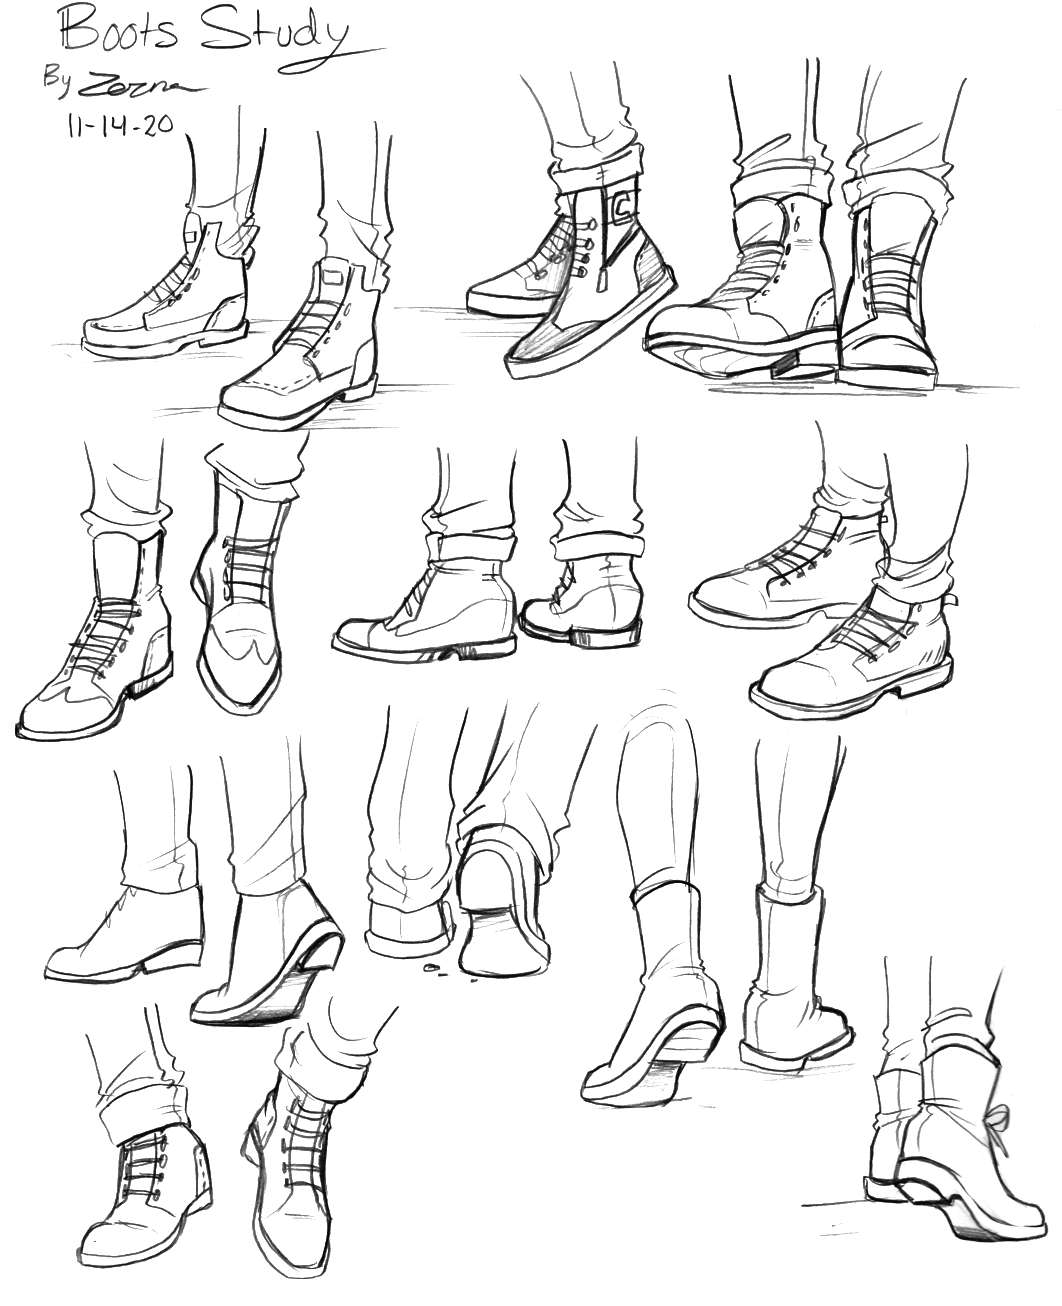 Let's Draw--Boots by Zerna on DeviantArt